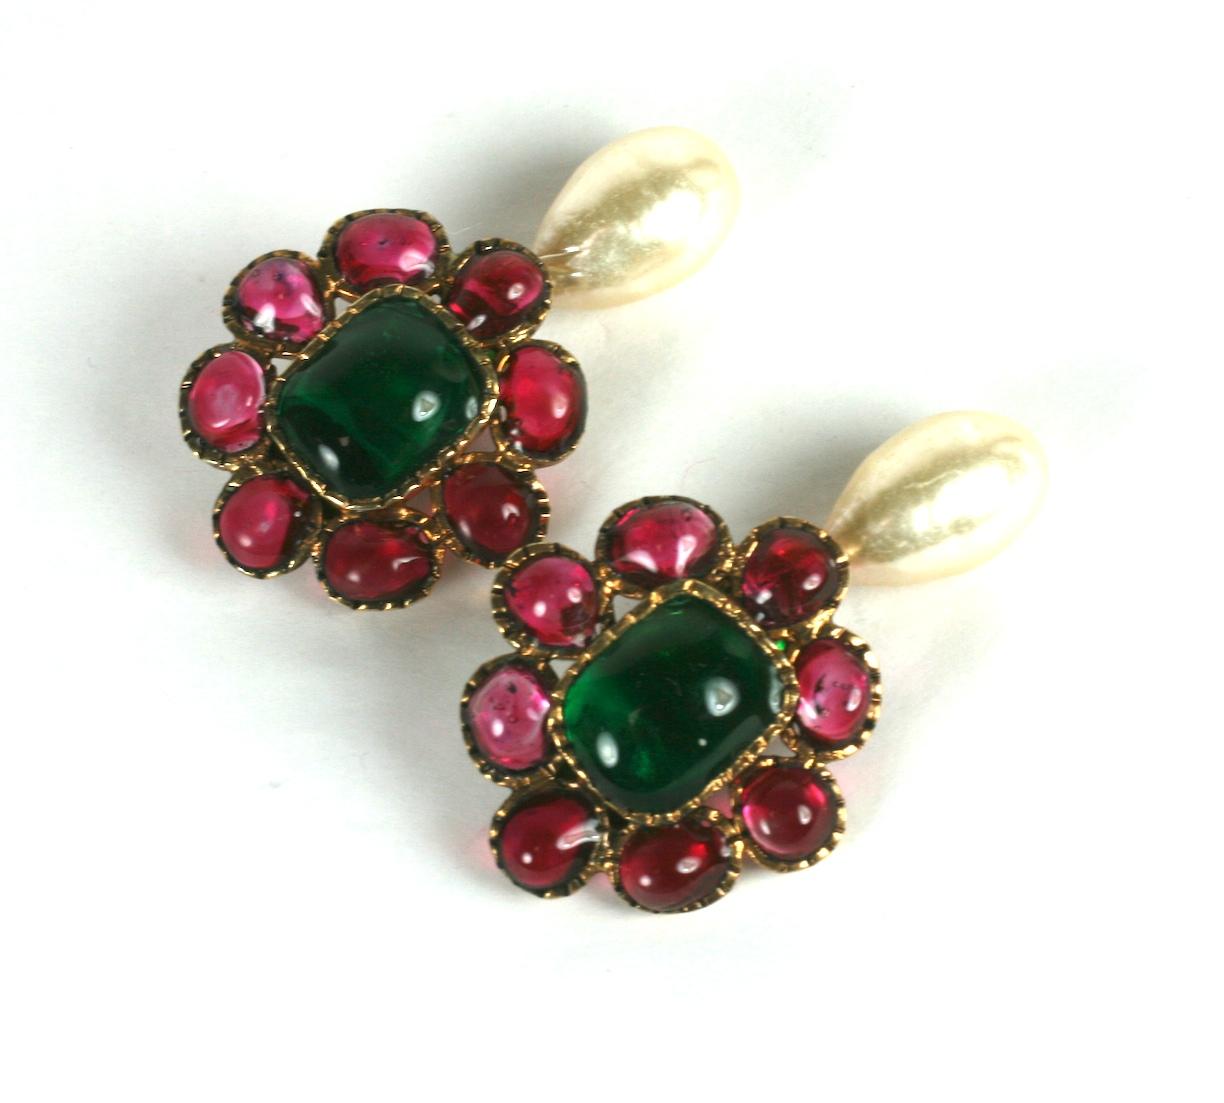 Maison Gripoix for Chanel Renaissance Style Earrings In Excellent Condition For Sale In New York, NY